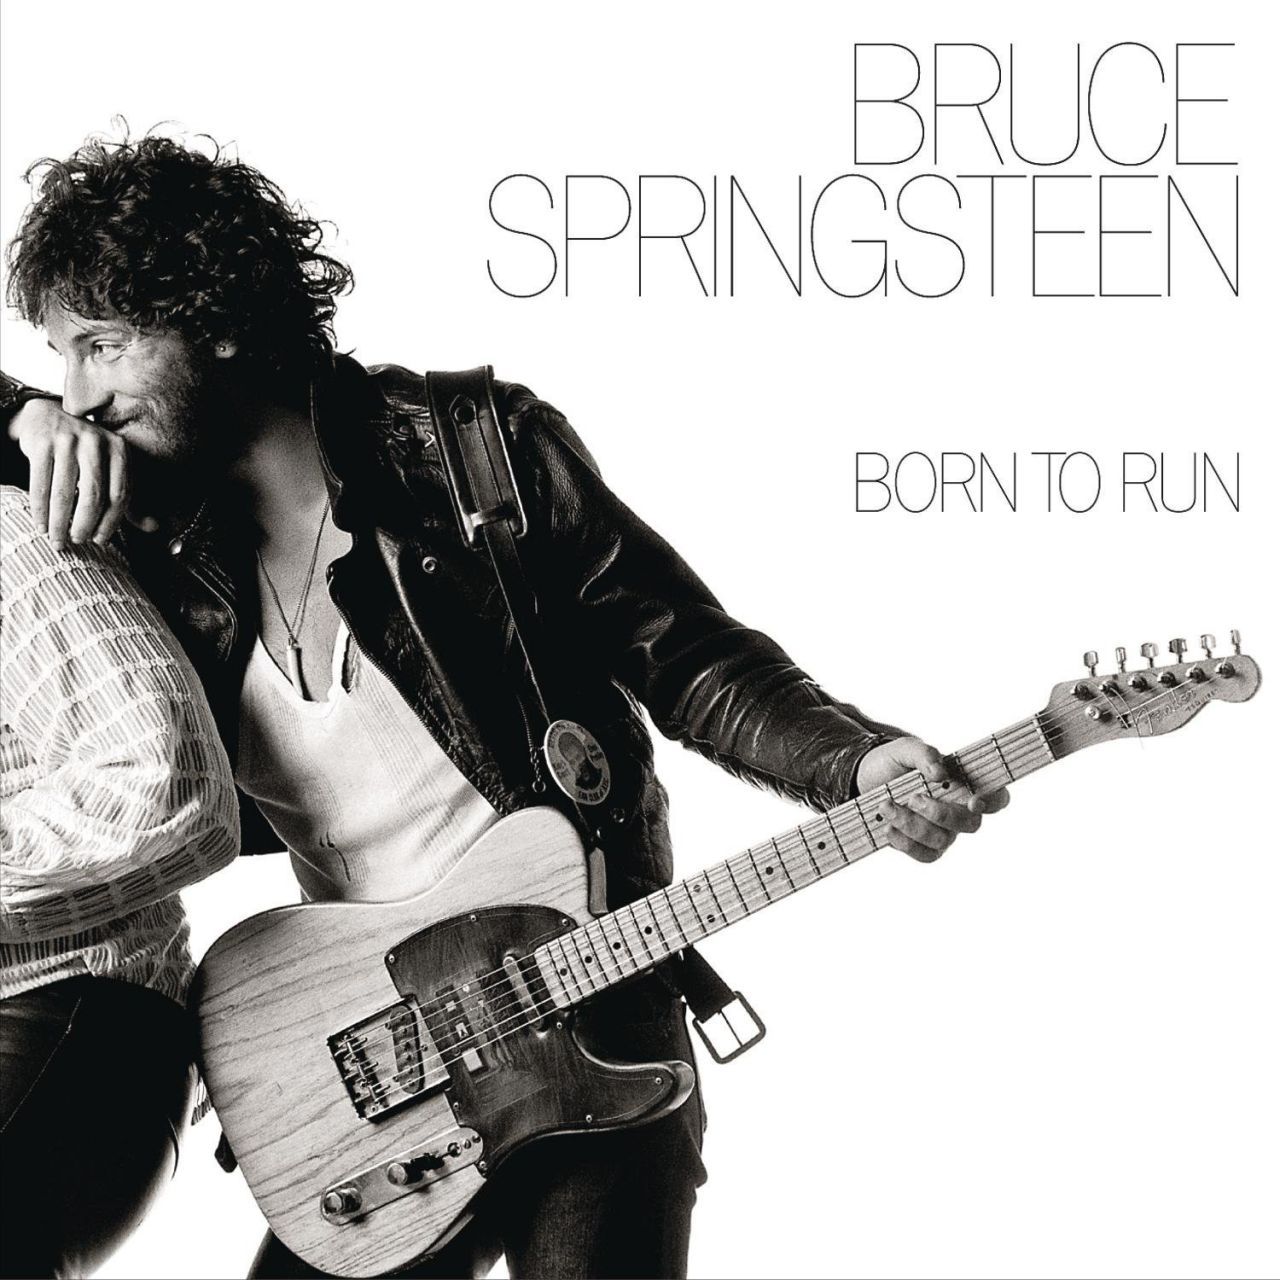 Art for Born To Run by Bruce Springsteen